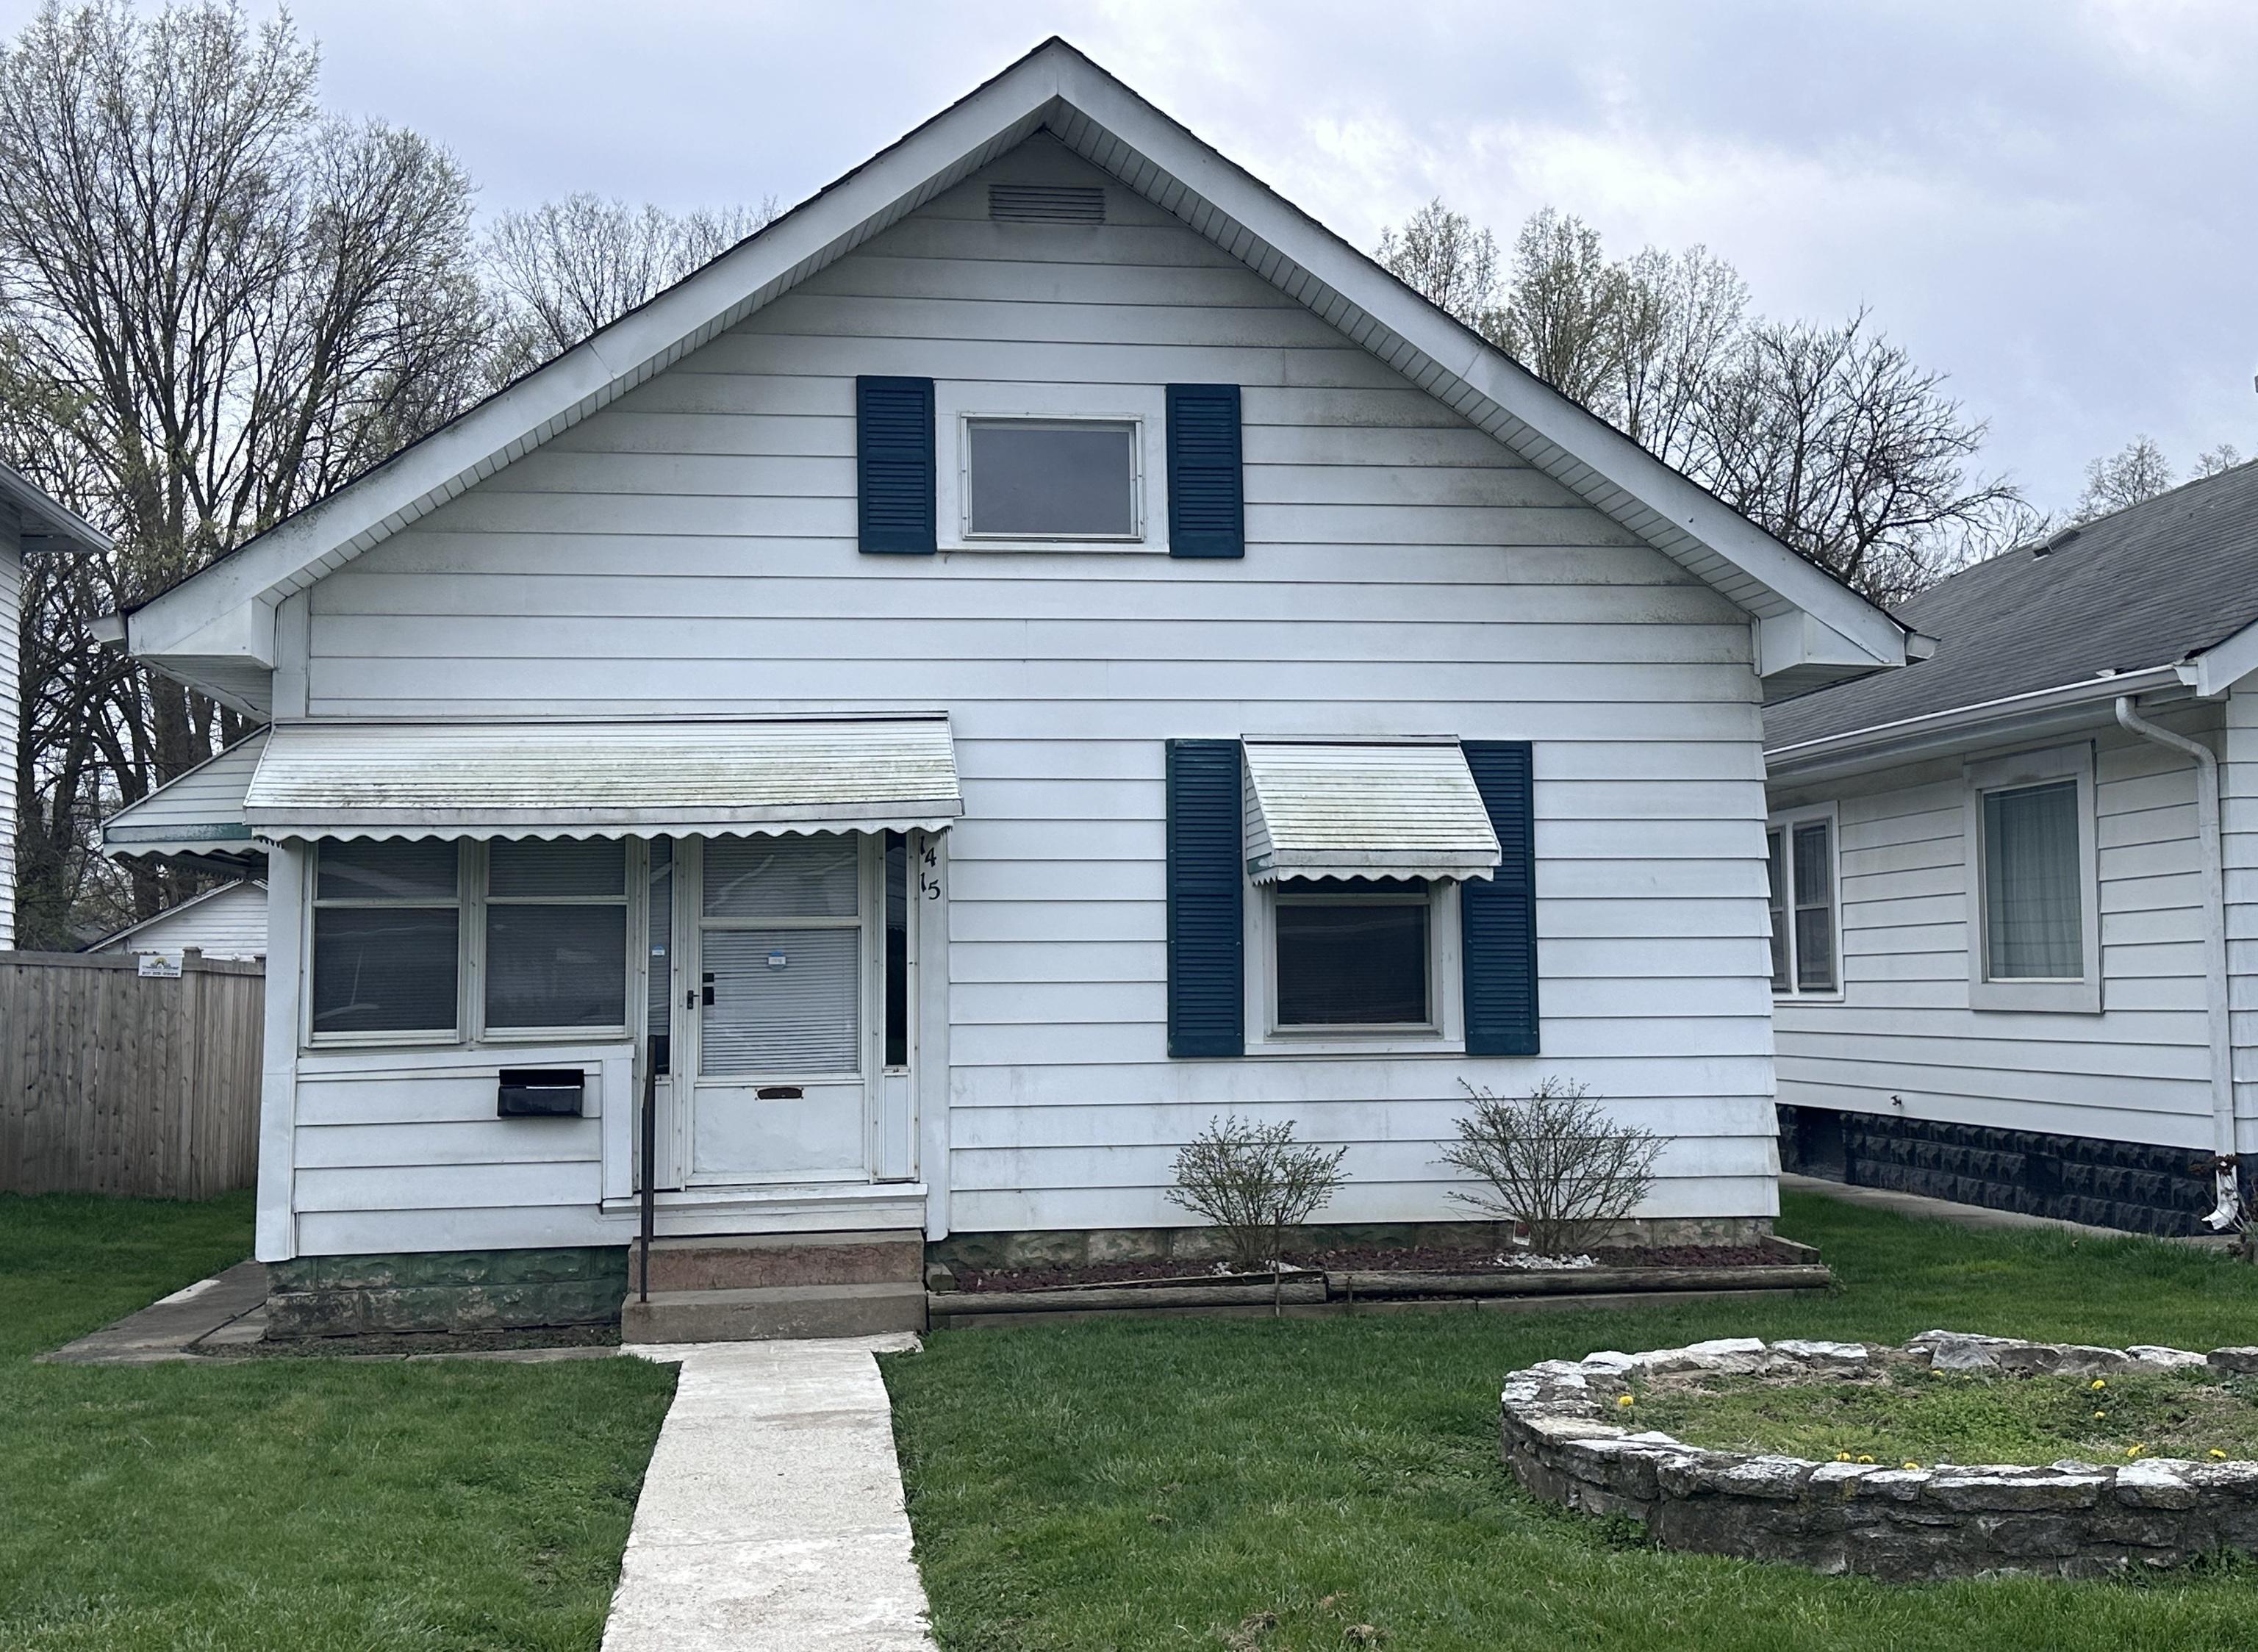 Photo one of 1415 W 34Th St Indianapolis IN 46208 | MLS 21972097